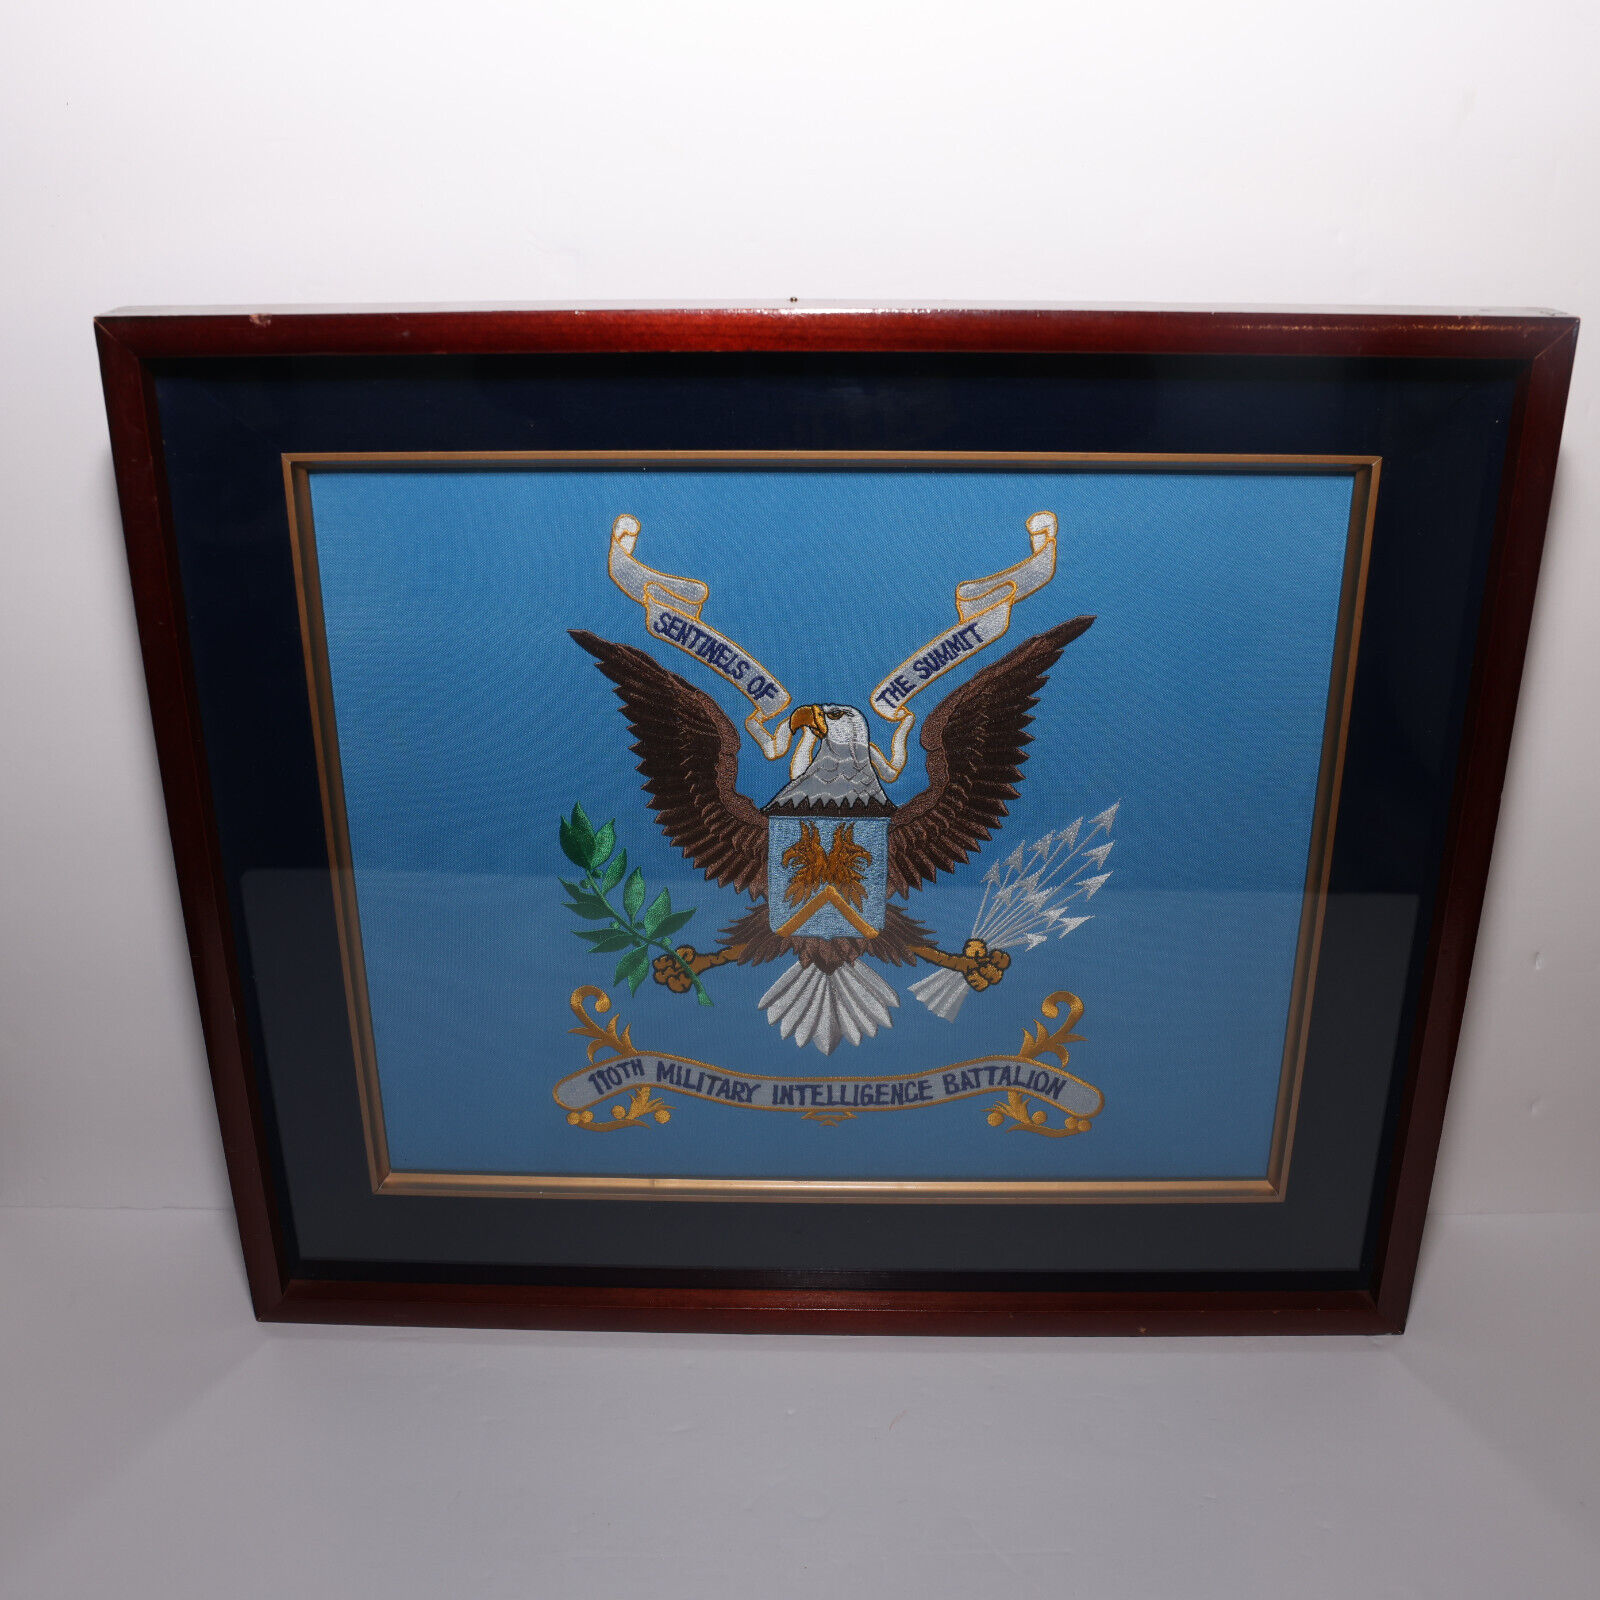 US Army 110th MI Bn Colors Framed Military Intelligence Sentinels Classic